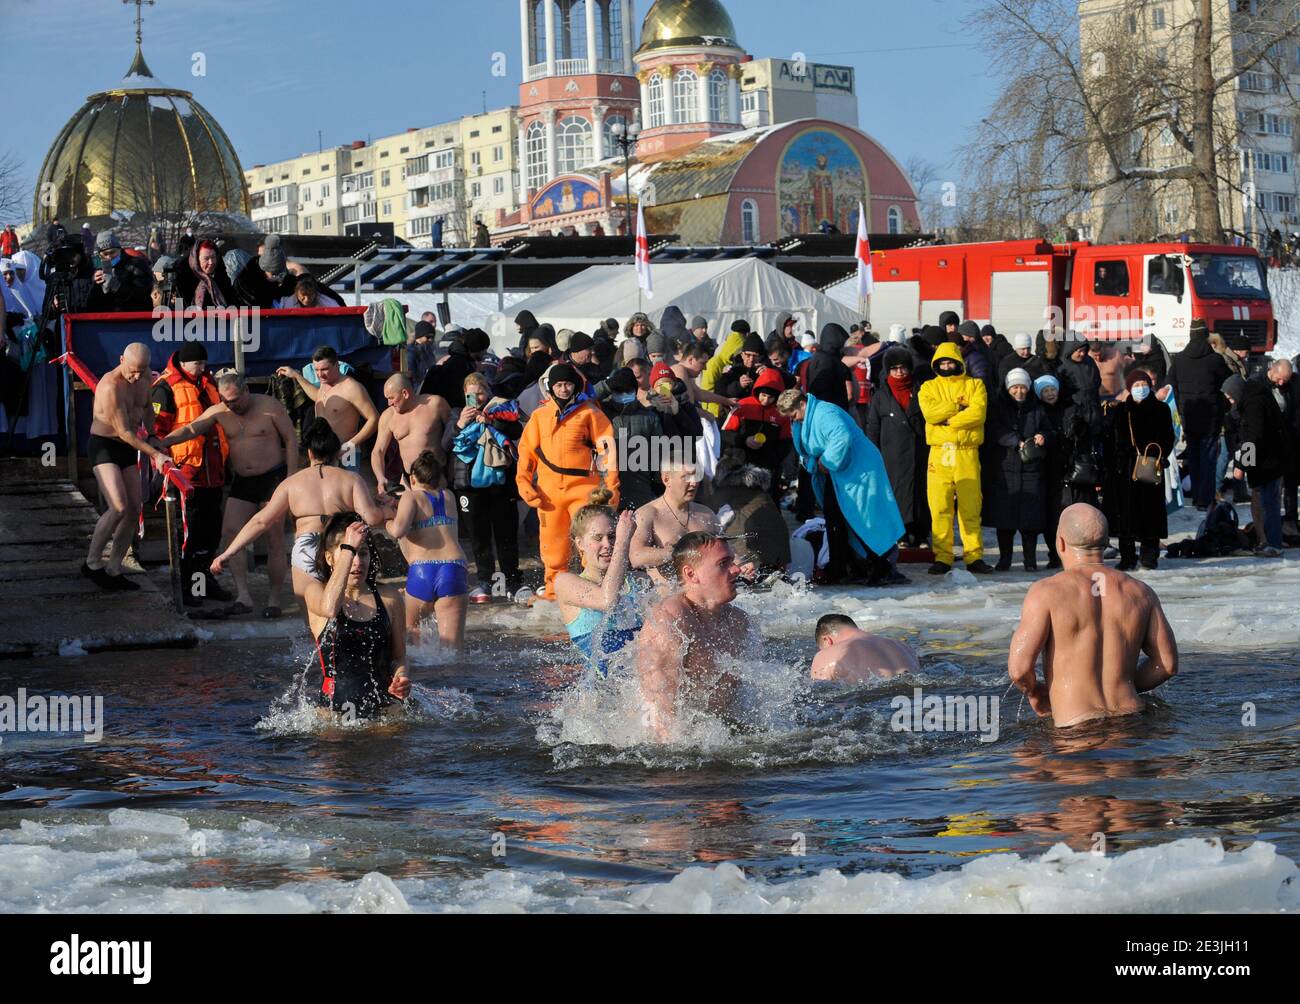 People seen plunging into icy water of the Dnieper river during the Orthodox Epiphany next to St. Pokrov's church.Epiphany, also known as Theophany in the east, is a Christian feast day that celebrates the revelation of God incarnate as Jesus Christ. In Western Christianity, the feast commemorates principally the visit of the Magi to the Christ Child, and thus Jesus' physical manifestation to the Gentiles. Stock Photo